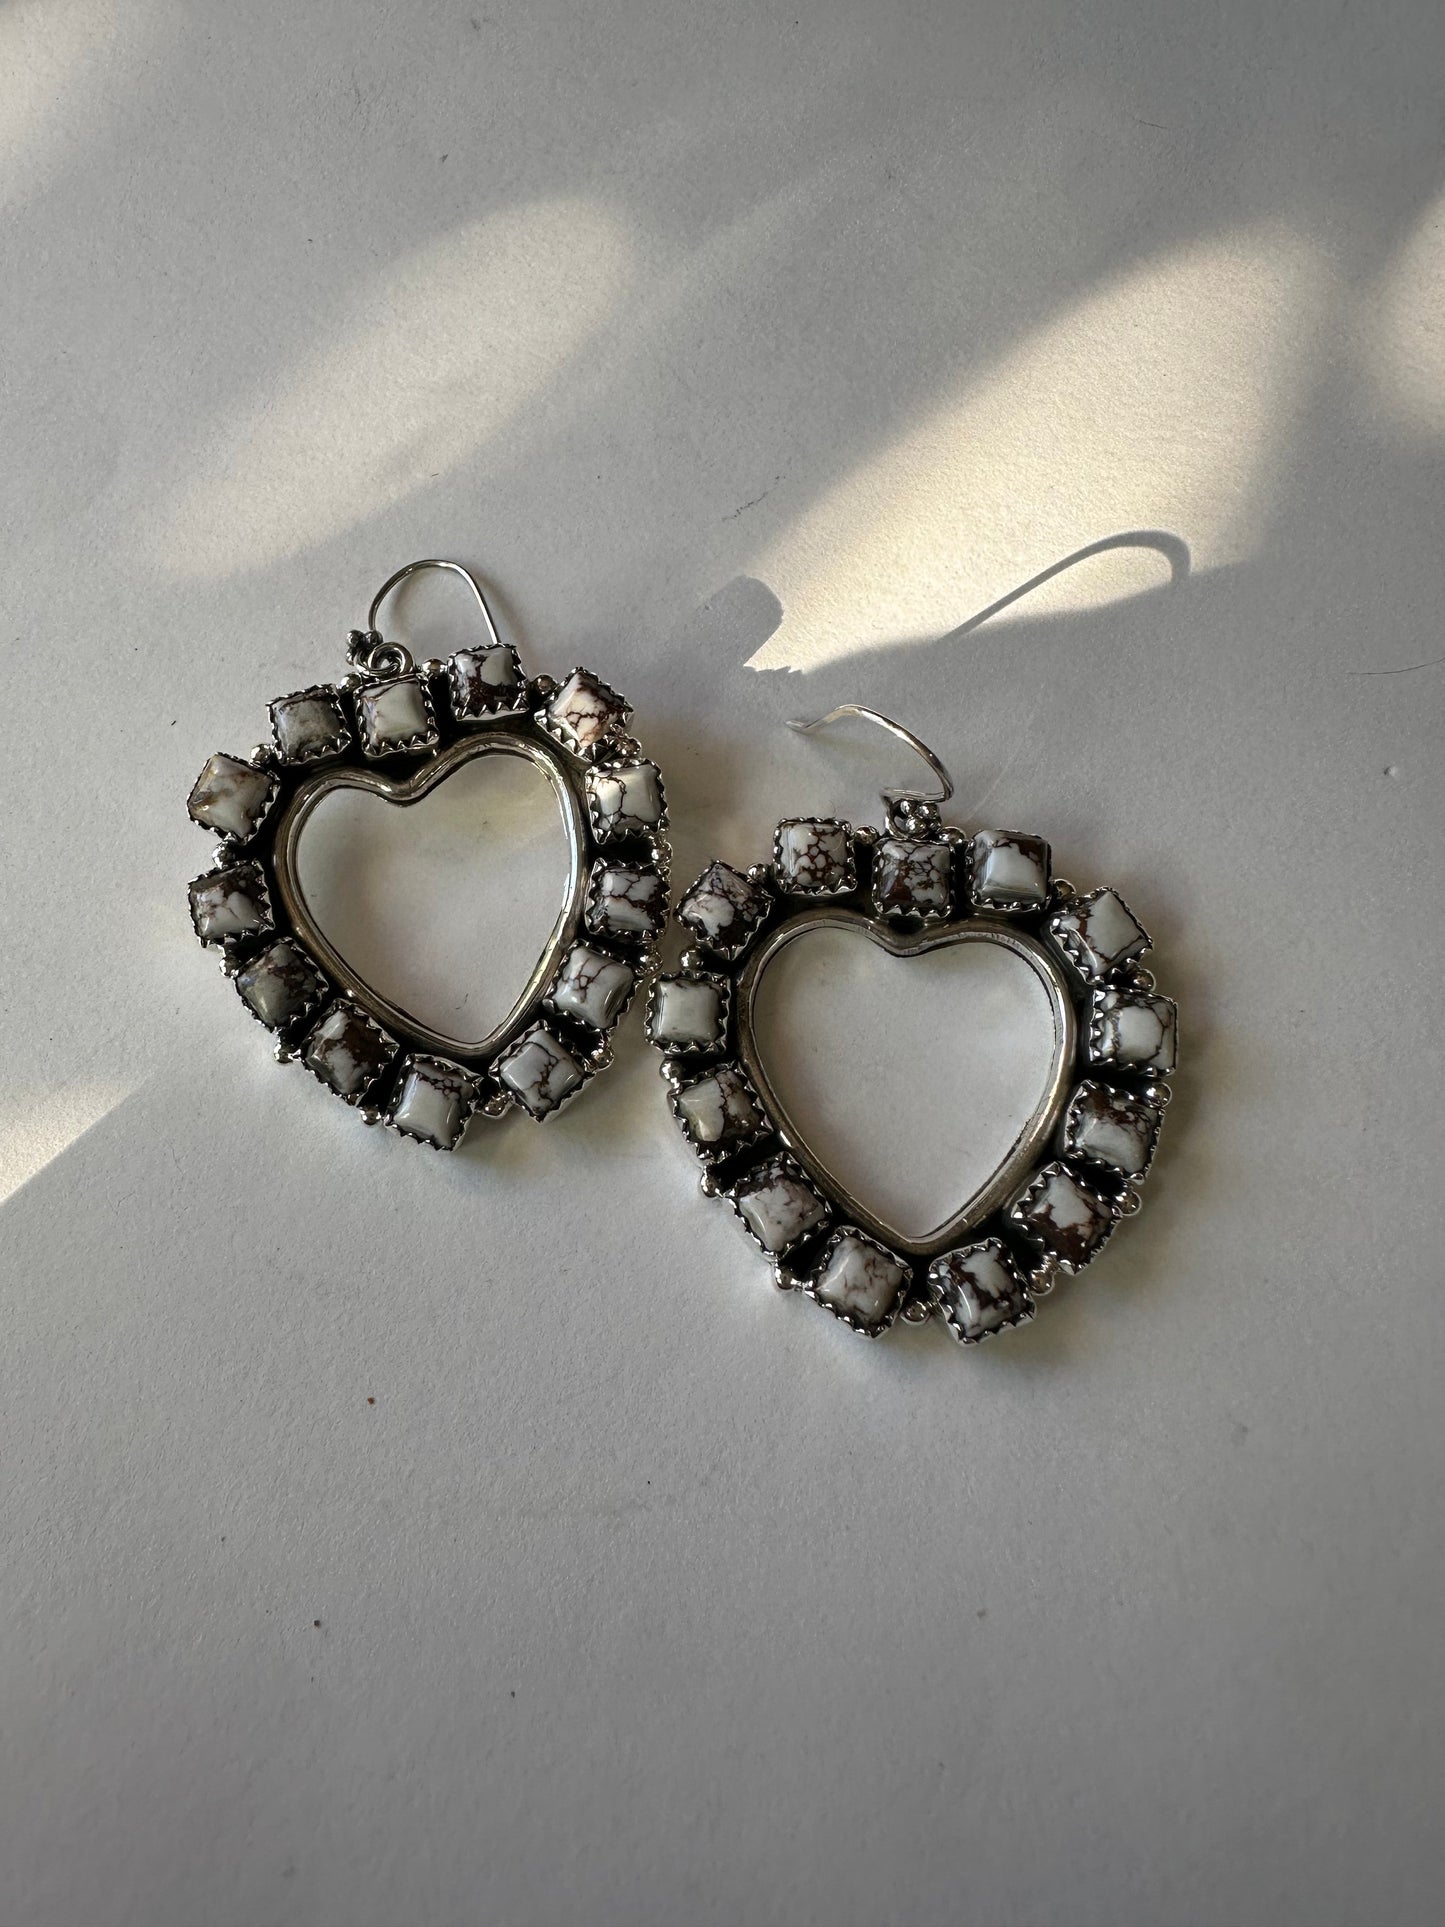 Handmade Wild Horse and Sterling Silver Heart Dangles